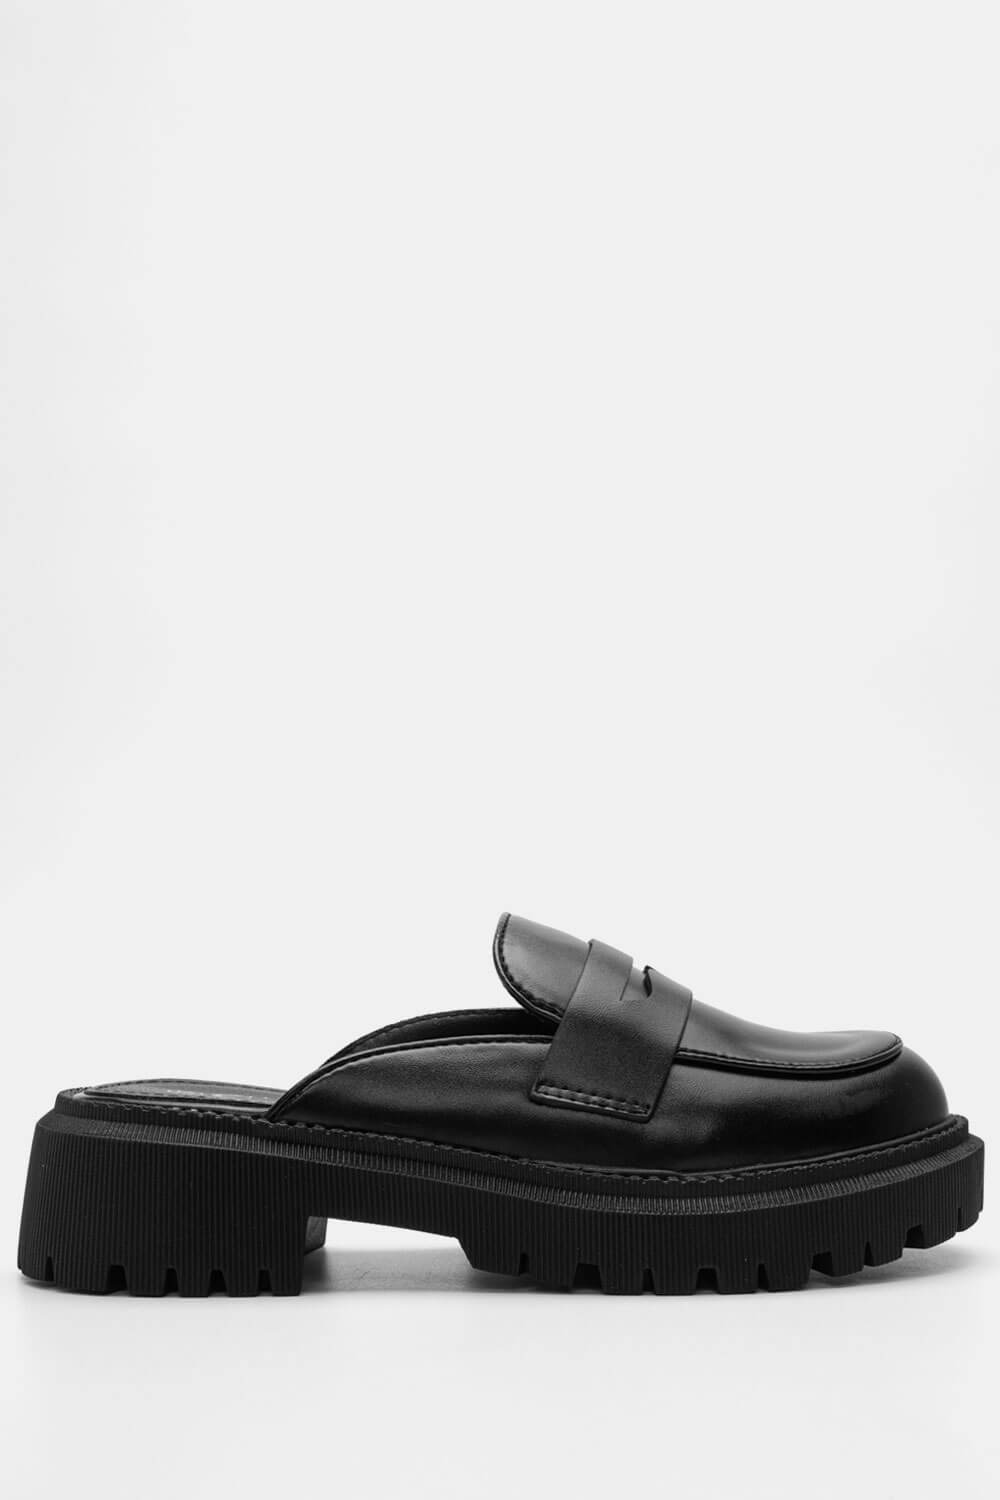 Mules Loafers με Τρακτερωτή Σόλα - Μαύρο ΠΑΠΟΥΤΣΙΑ > Loafers / Δετά